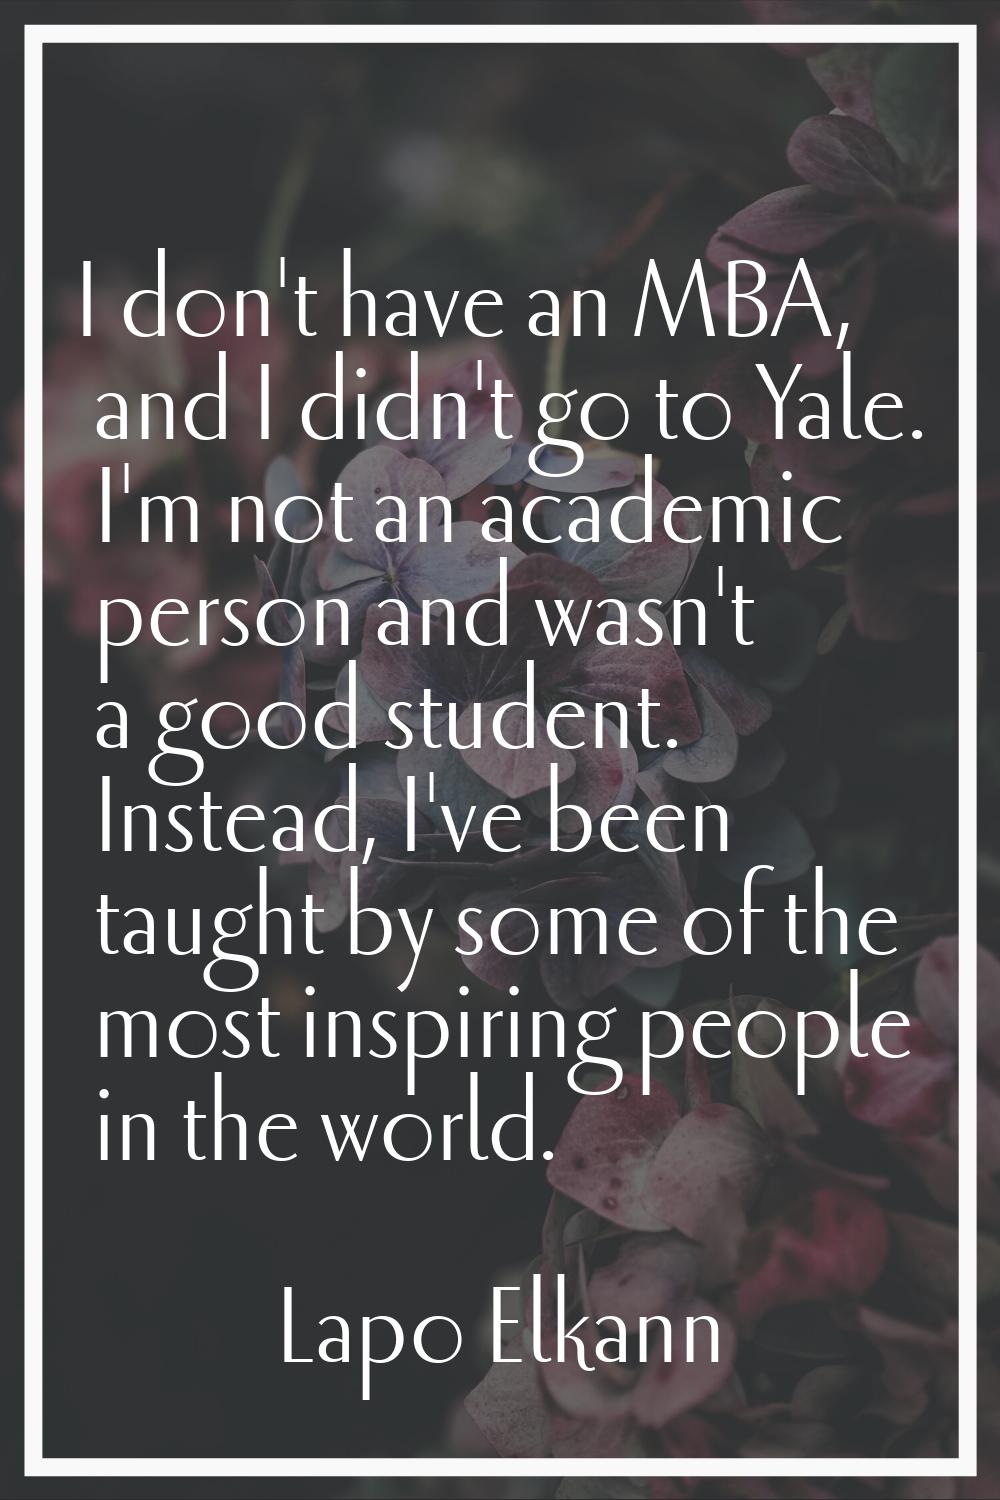 I don't have an MBA, and I didn't go to Yale. I'm not an academic person and wasn't a good student.